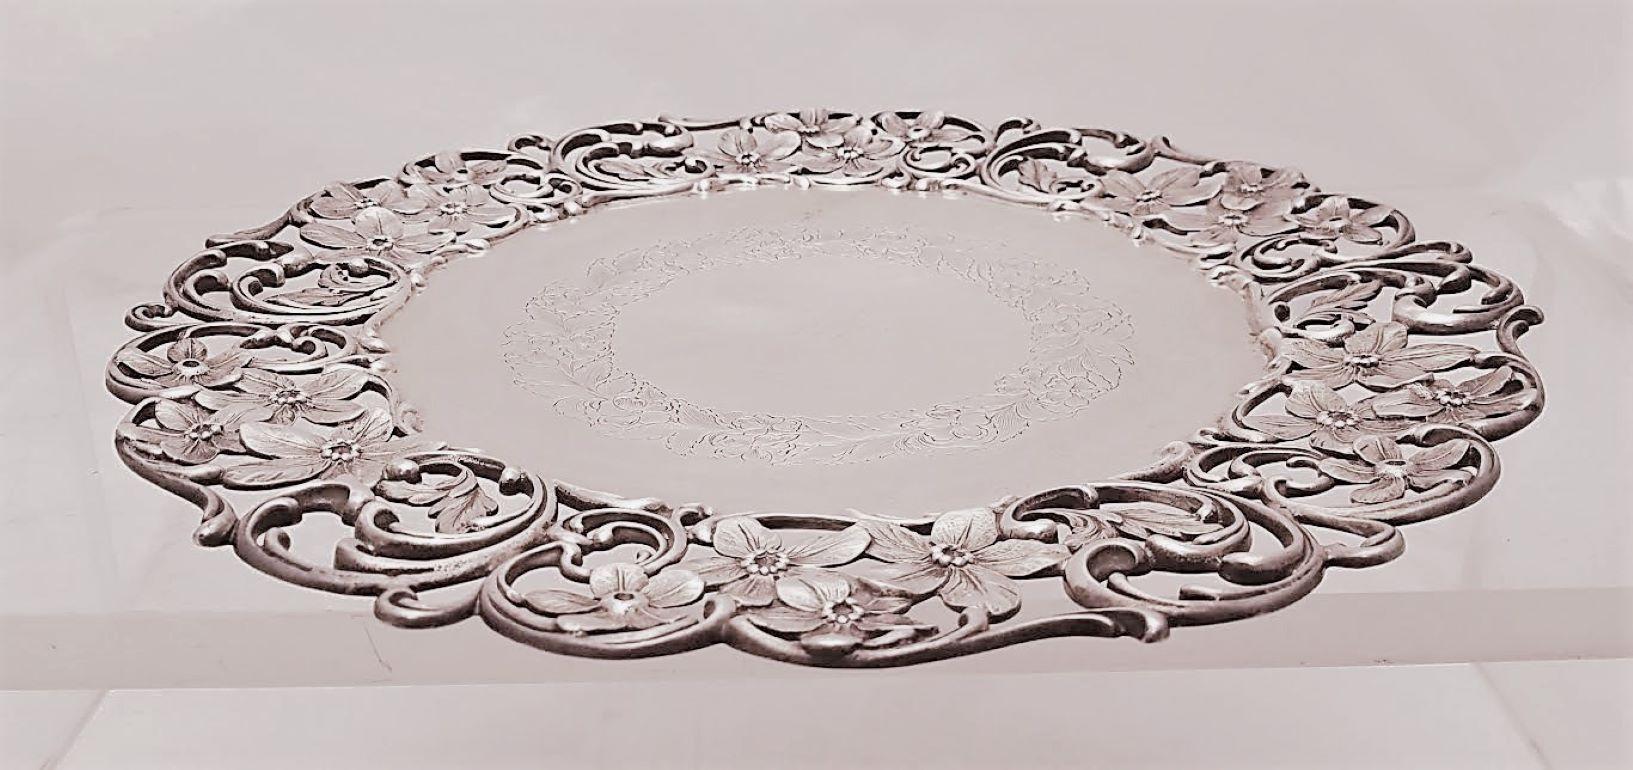 Stunning Roger Williams Silver Co. sterling silver plate / dish with intricate floral and swirl designs on the rim. Floral and leaf engravings on the center on the plate, standing on a small pedestal. A great gift and addition to one's collection or